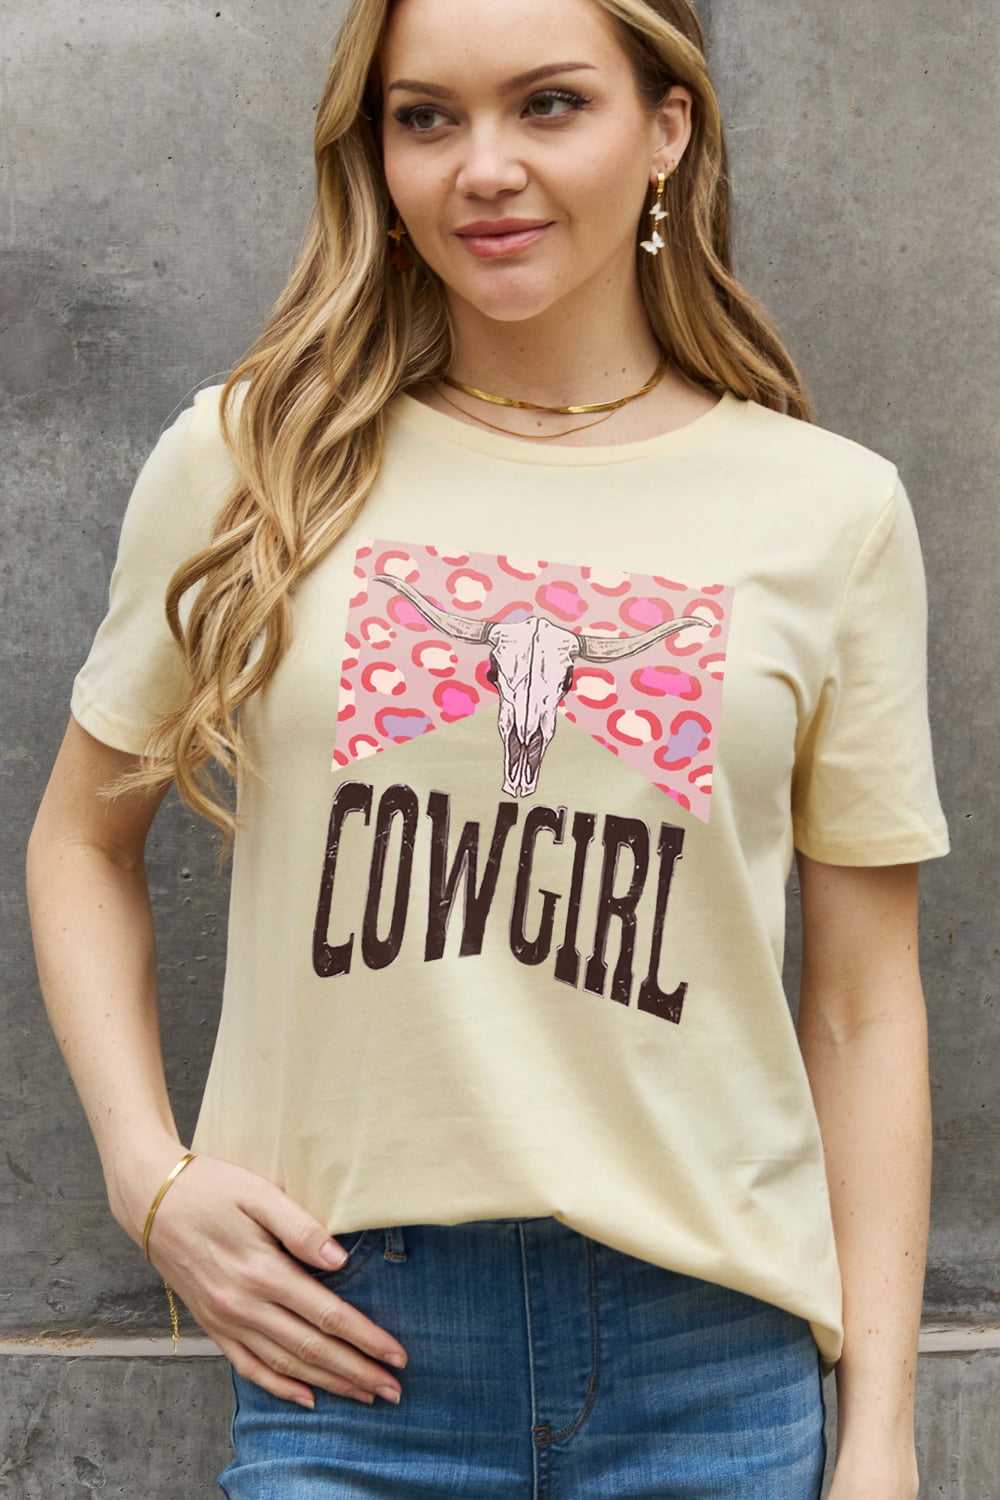 COWGIRL Graphic T-Shirt - ONLINE EXCLUSIVE